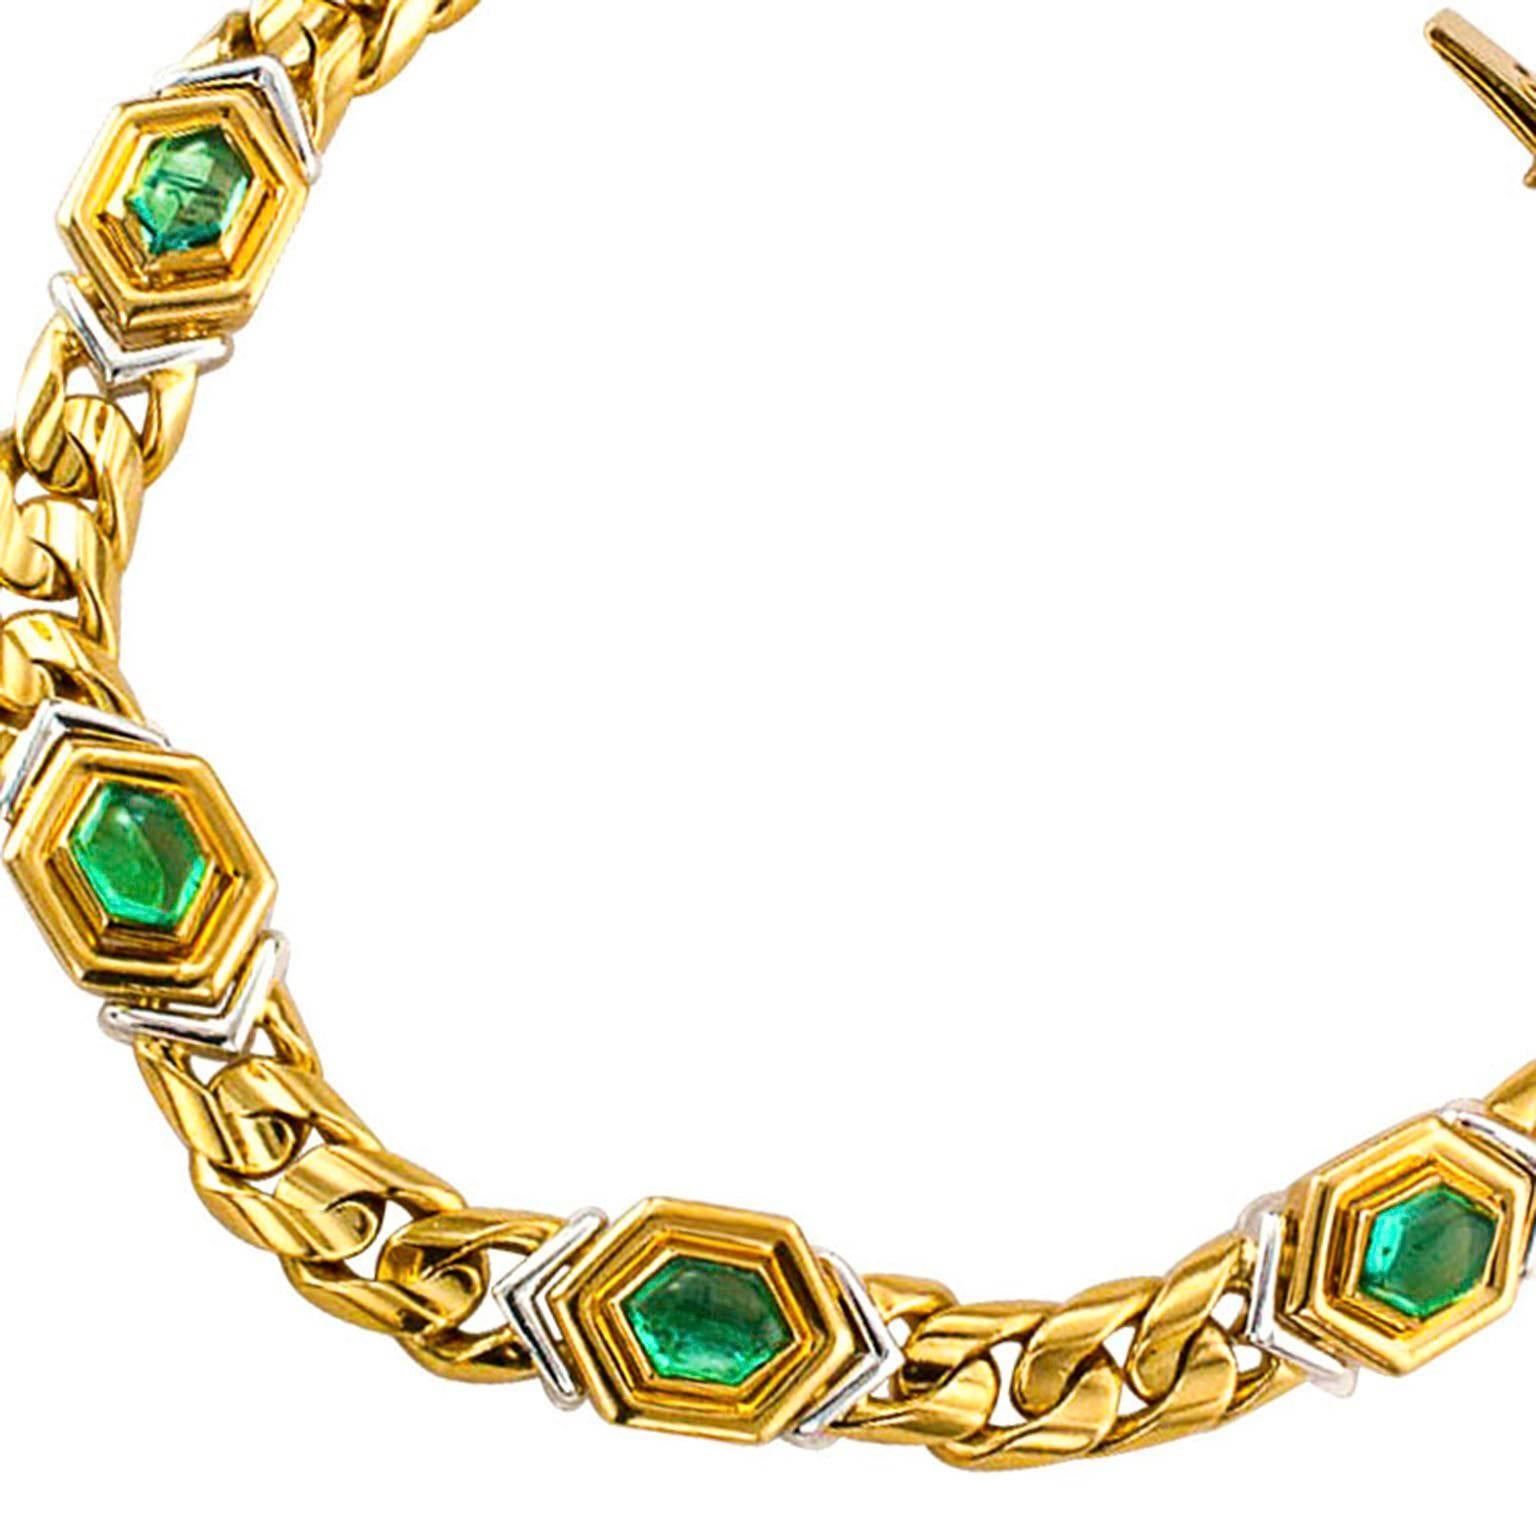 Bvlgari Estate Emerald Gold and Platinum Link Bracelet

In a manner that is distinctly BVLGARI, 18-karat gold and platinum engage in a courtship with six kite-shaped emerald cabochons totaling approximately 3.00 carats.  Delightful... beautiful